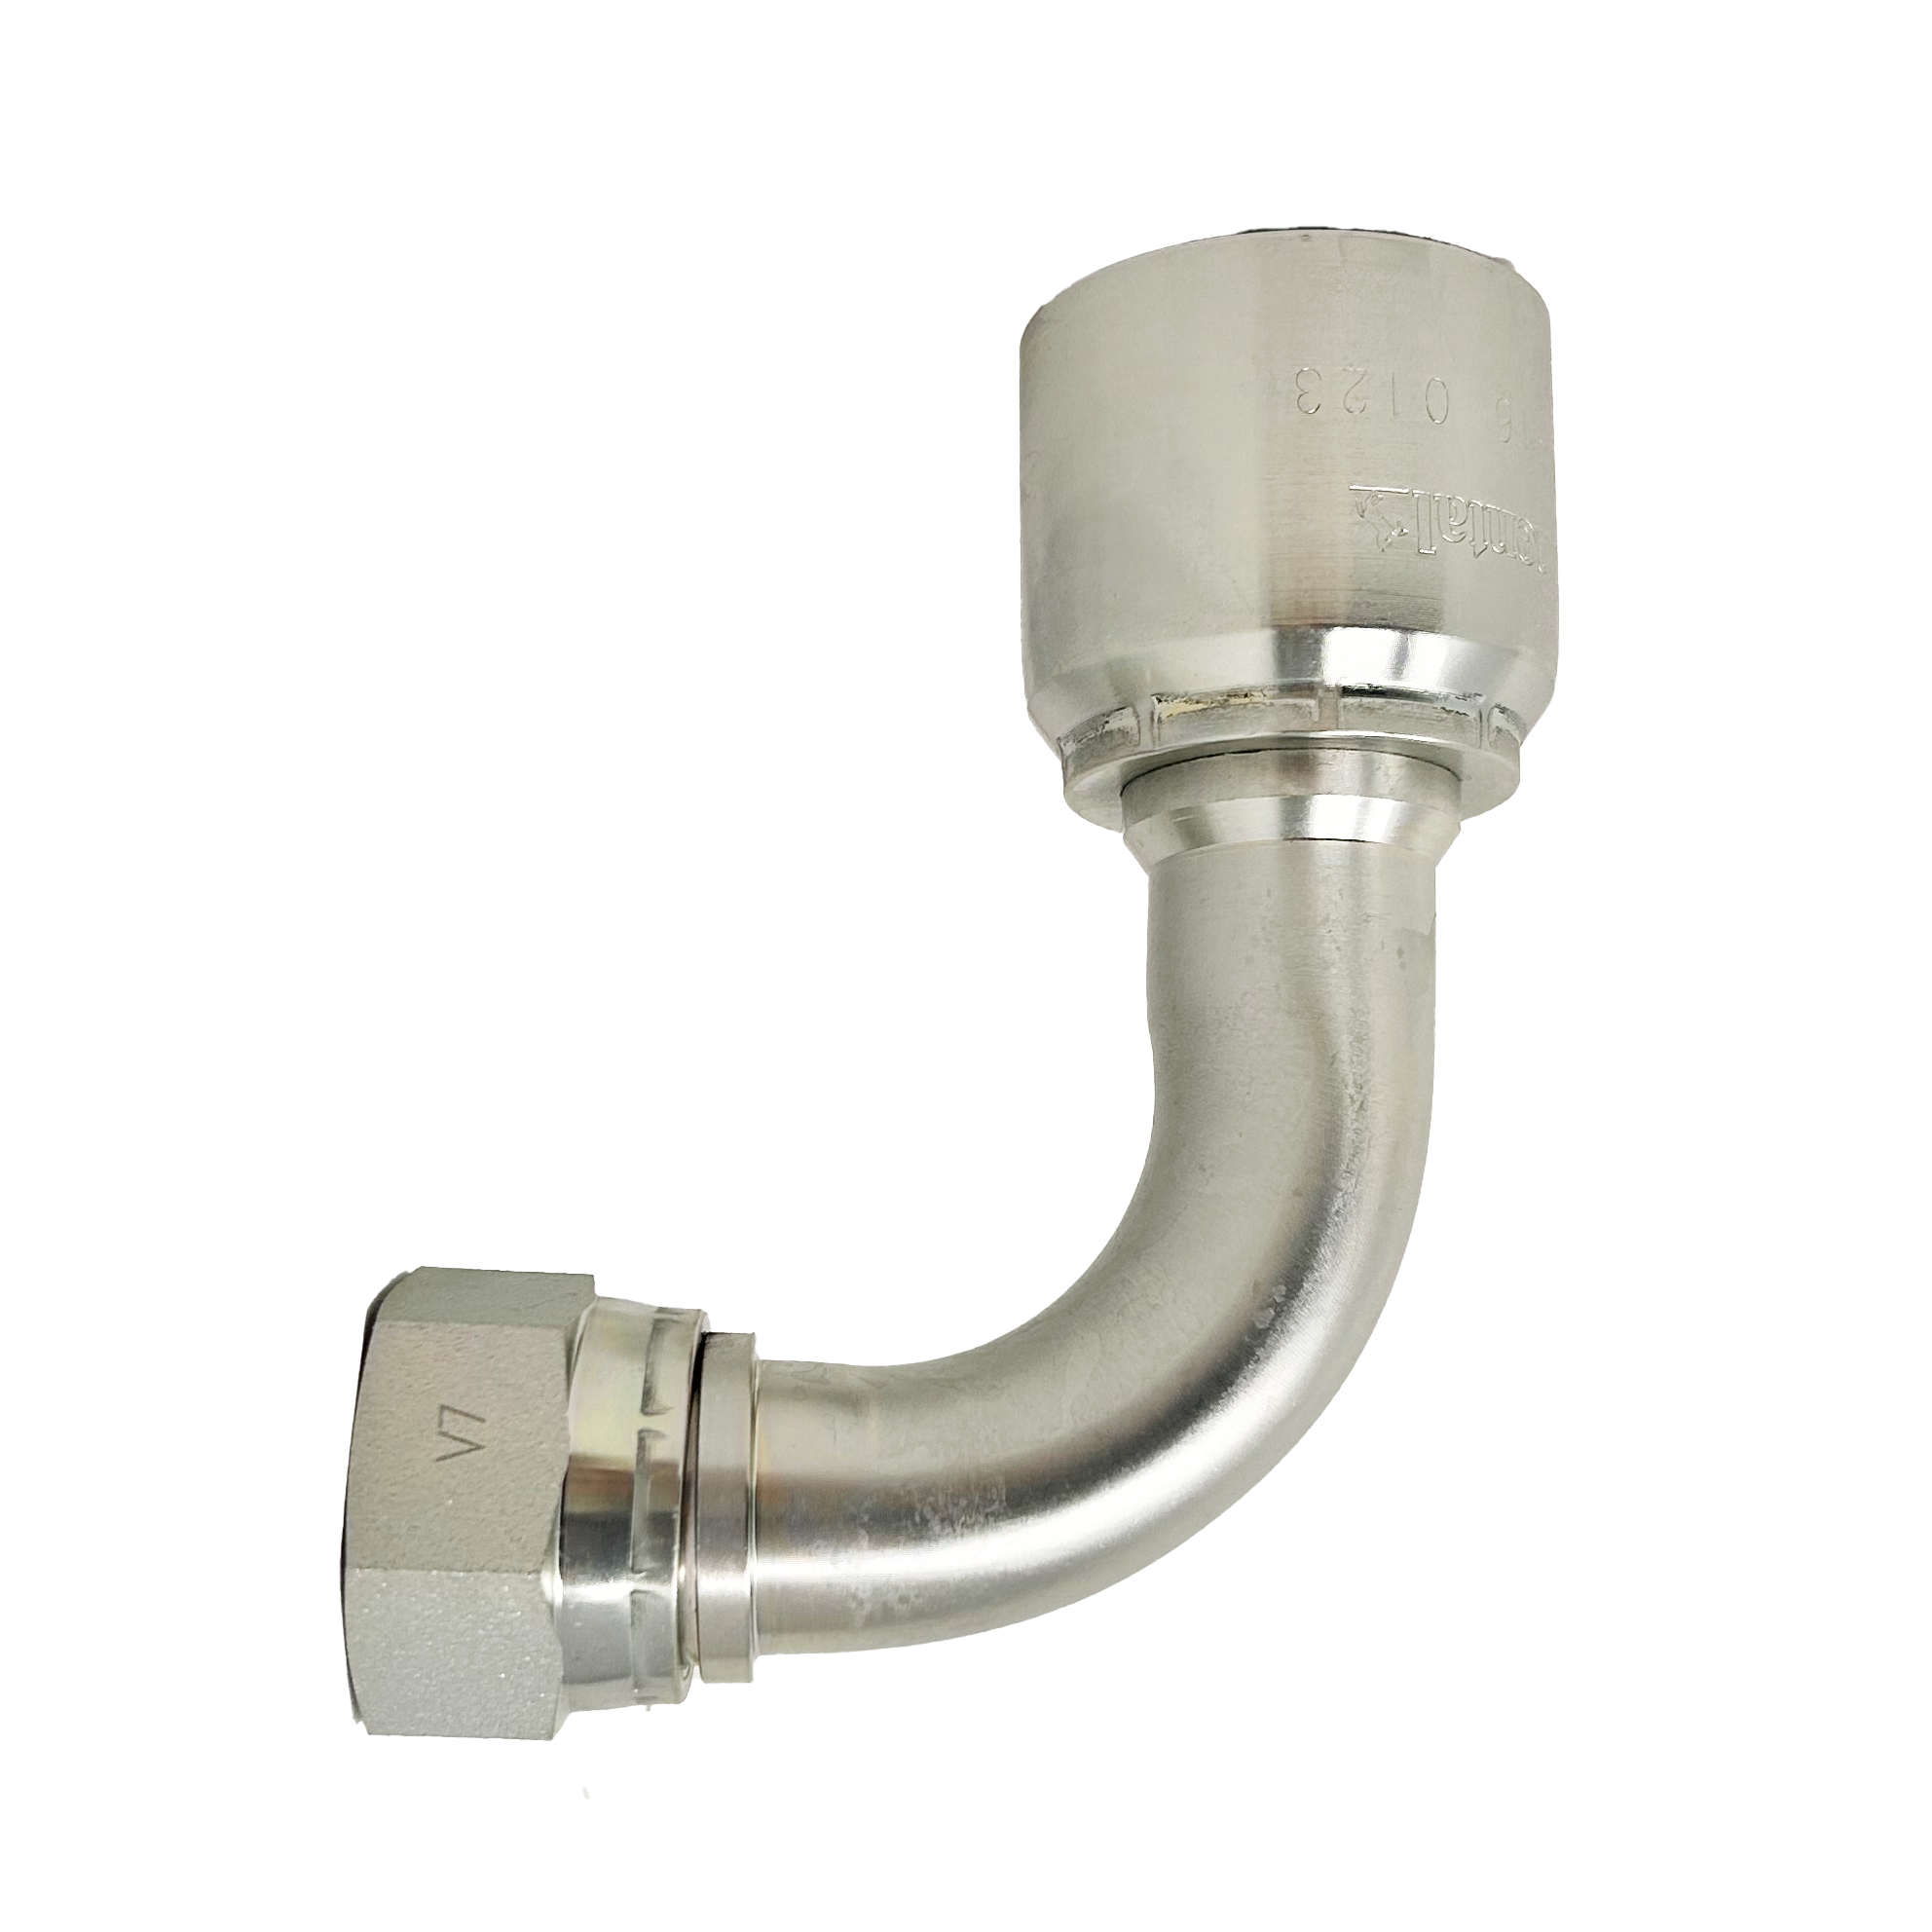 B2-JCFX90-2020S: Continental Hose Fitting, 1.25 (1-1/4") Hose ID x 1-5/8-12 Female JIC, 90-Degree Swivel Connection